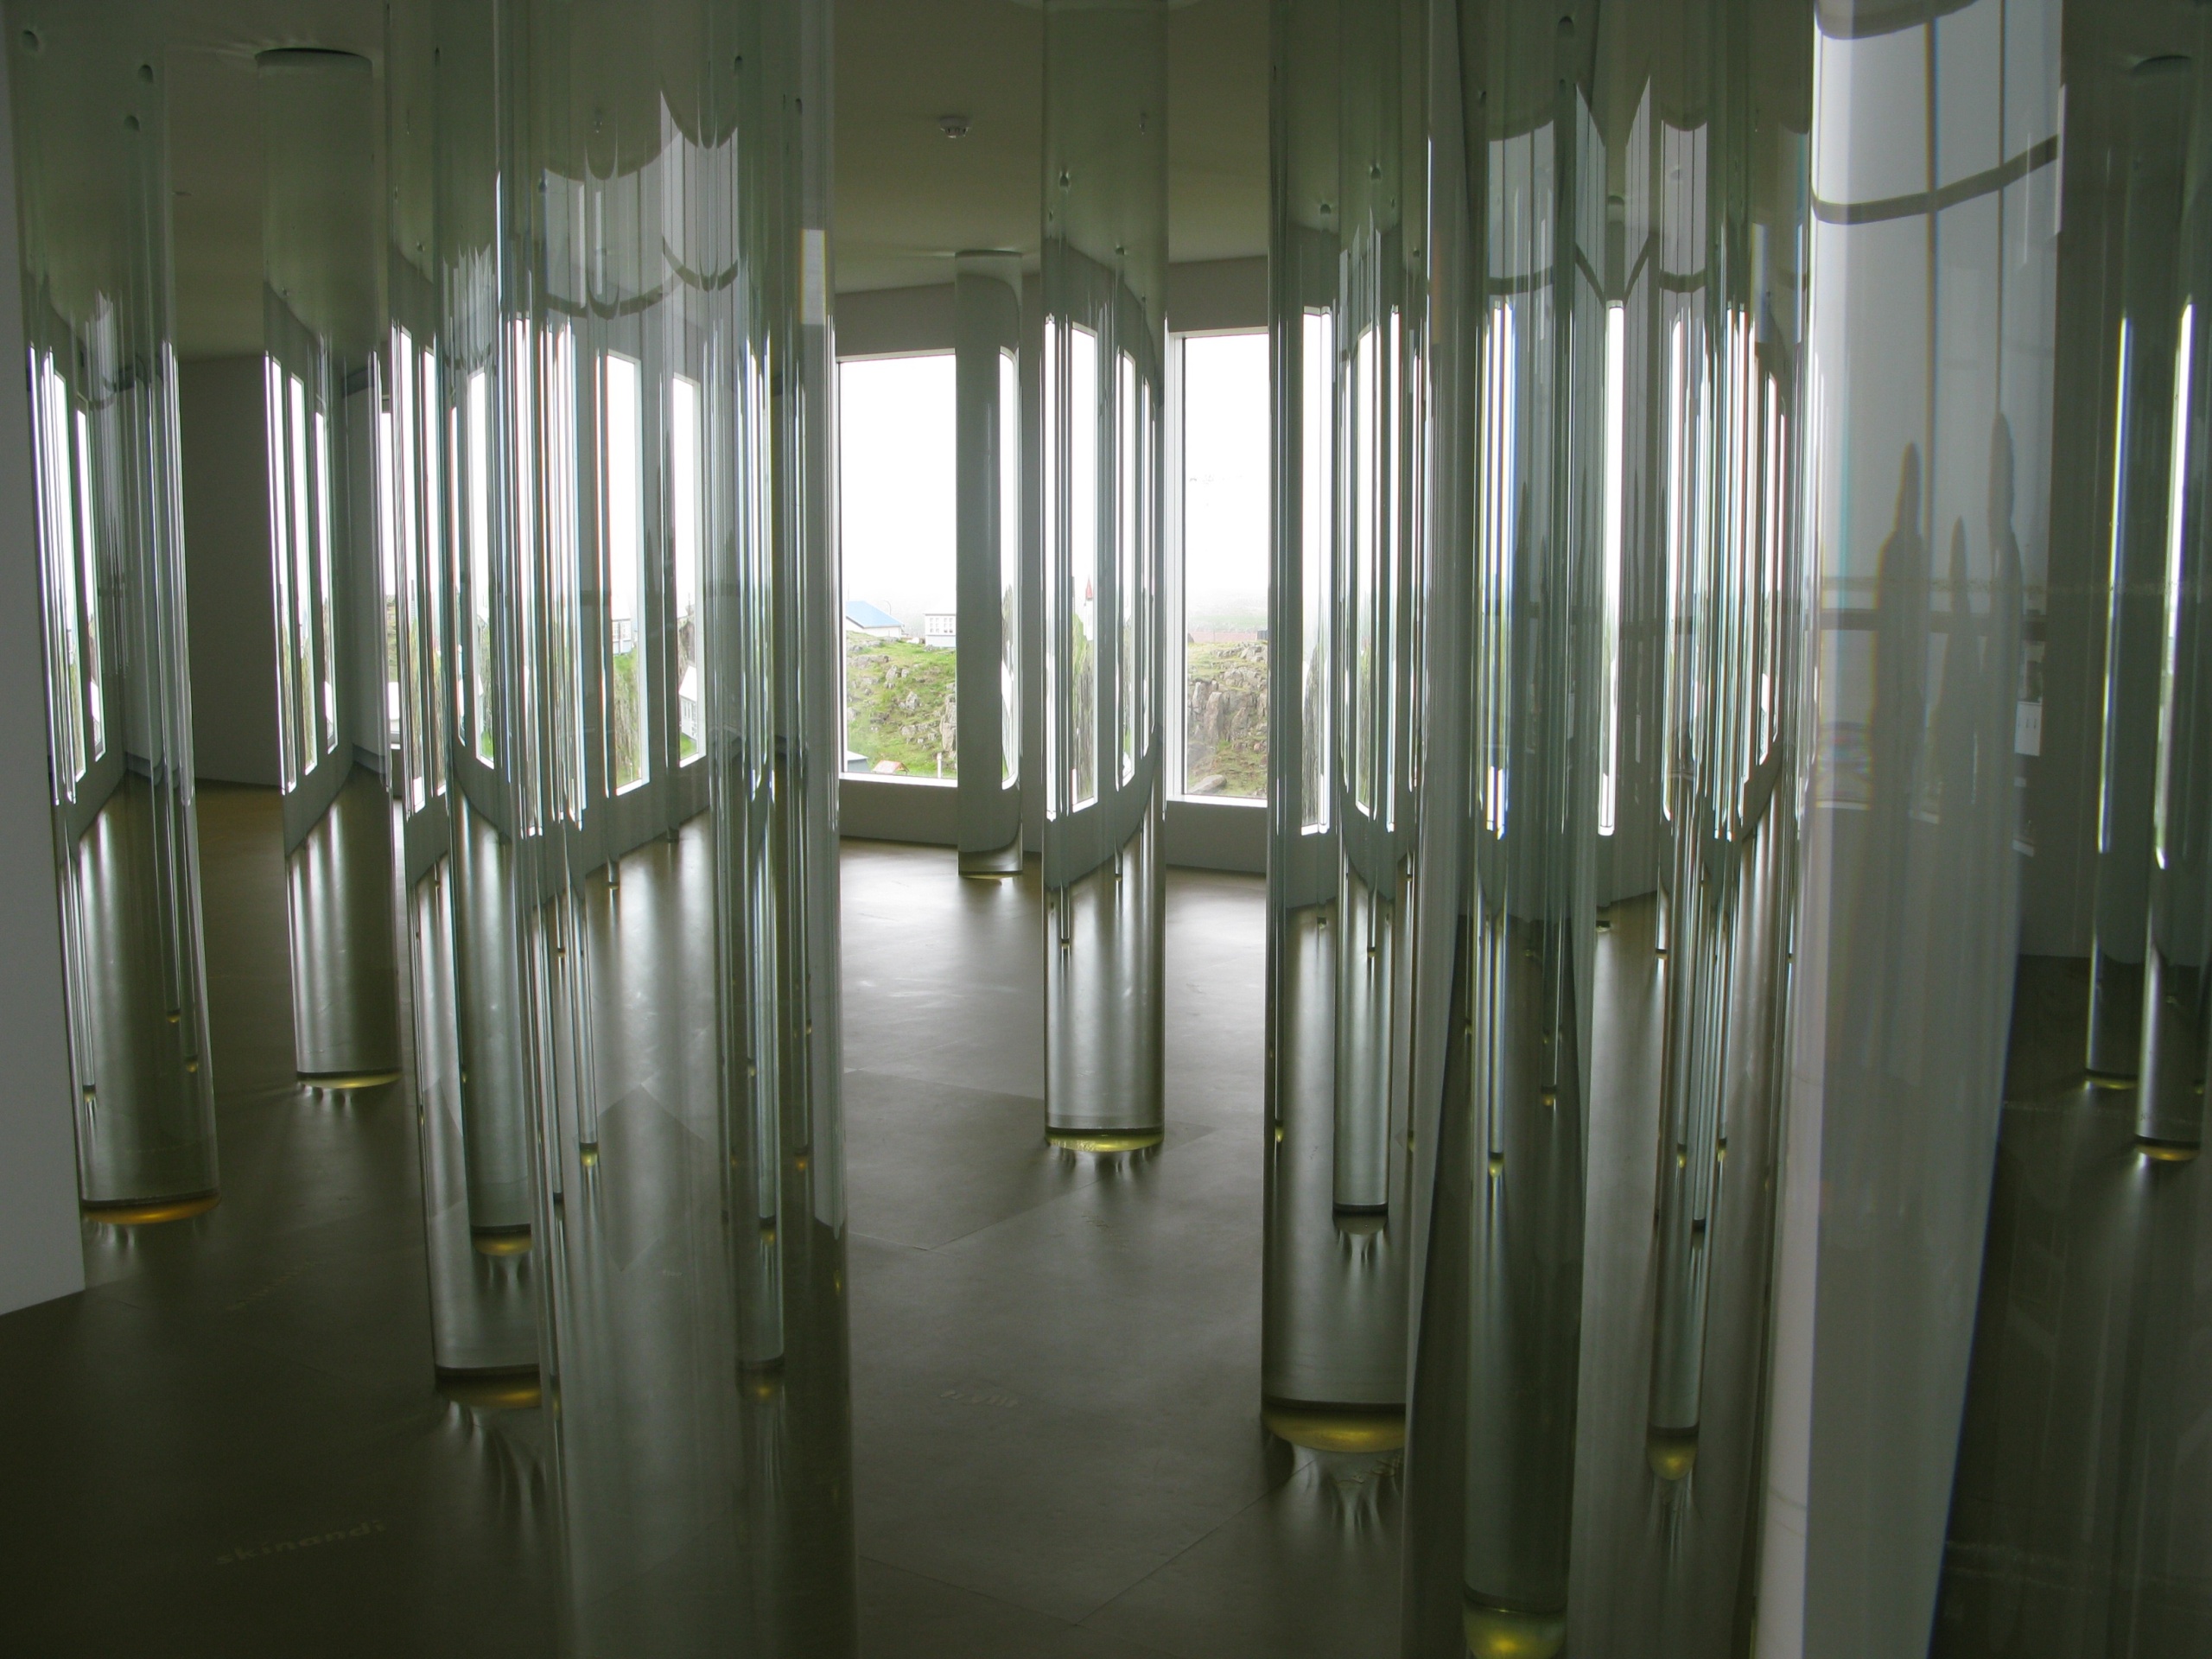 Floor-to-ceiling glass columns containing melt ice removed from Icelandic glaciers, from Vatnasafn/Library of Water located in Stykkisholmur, Iceland, 2007